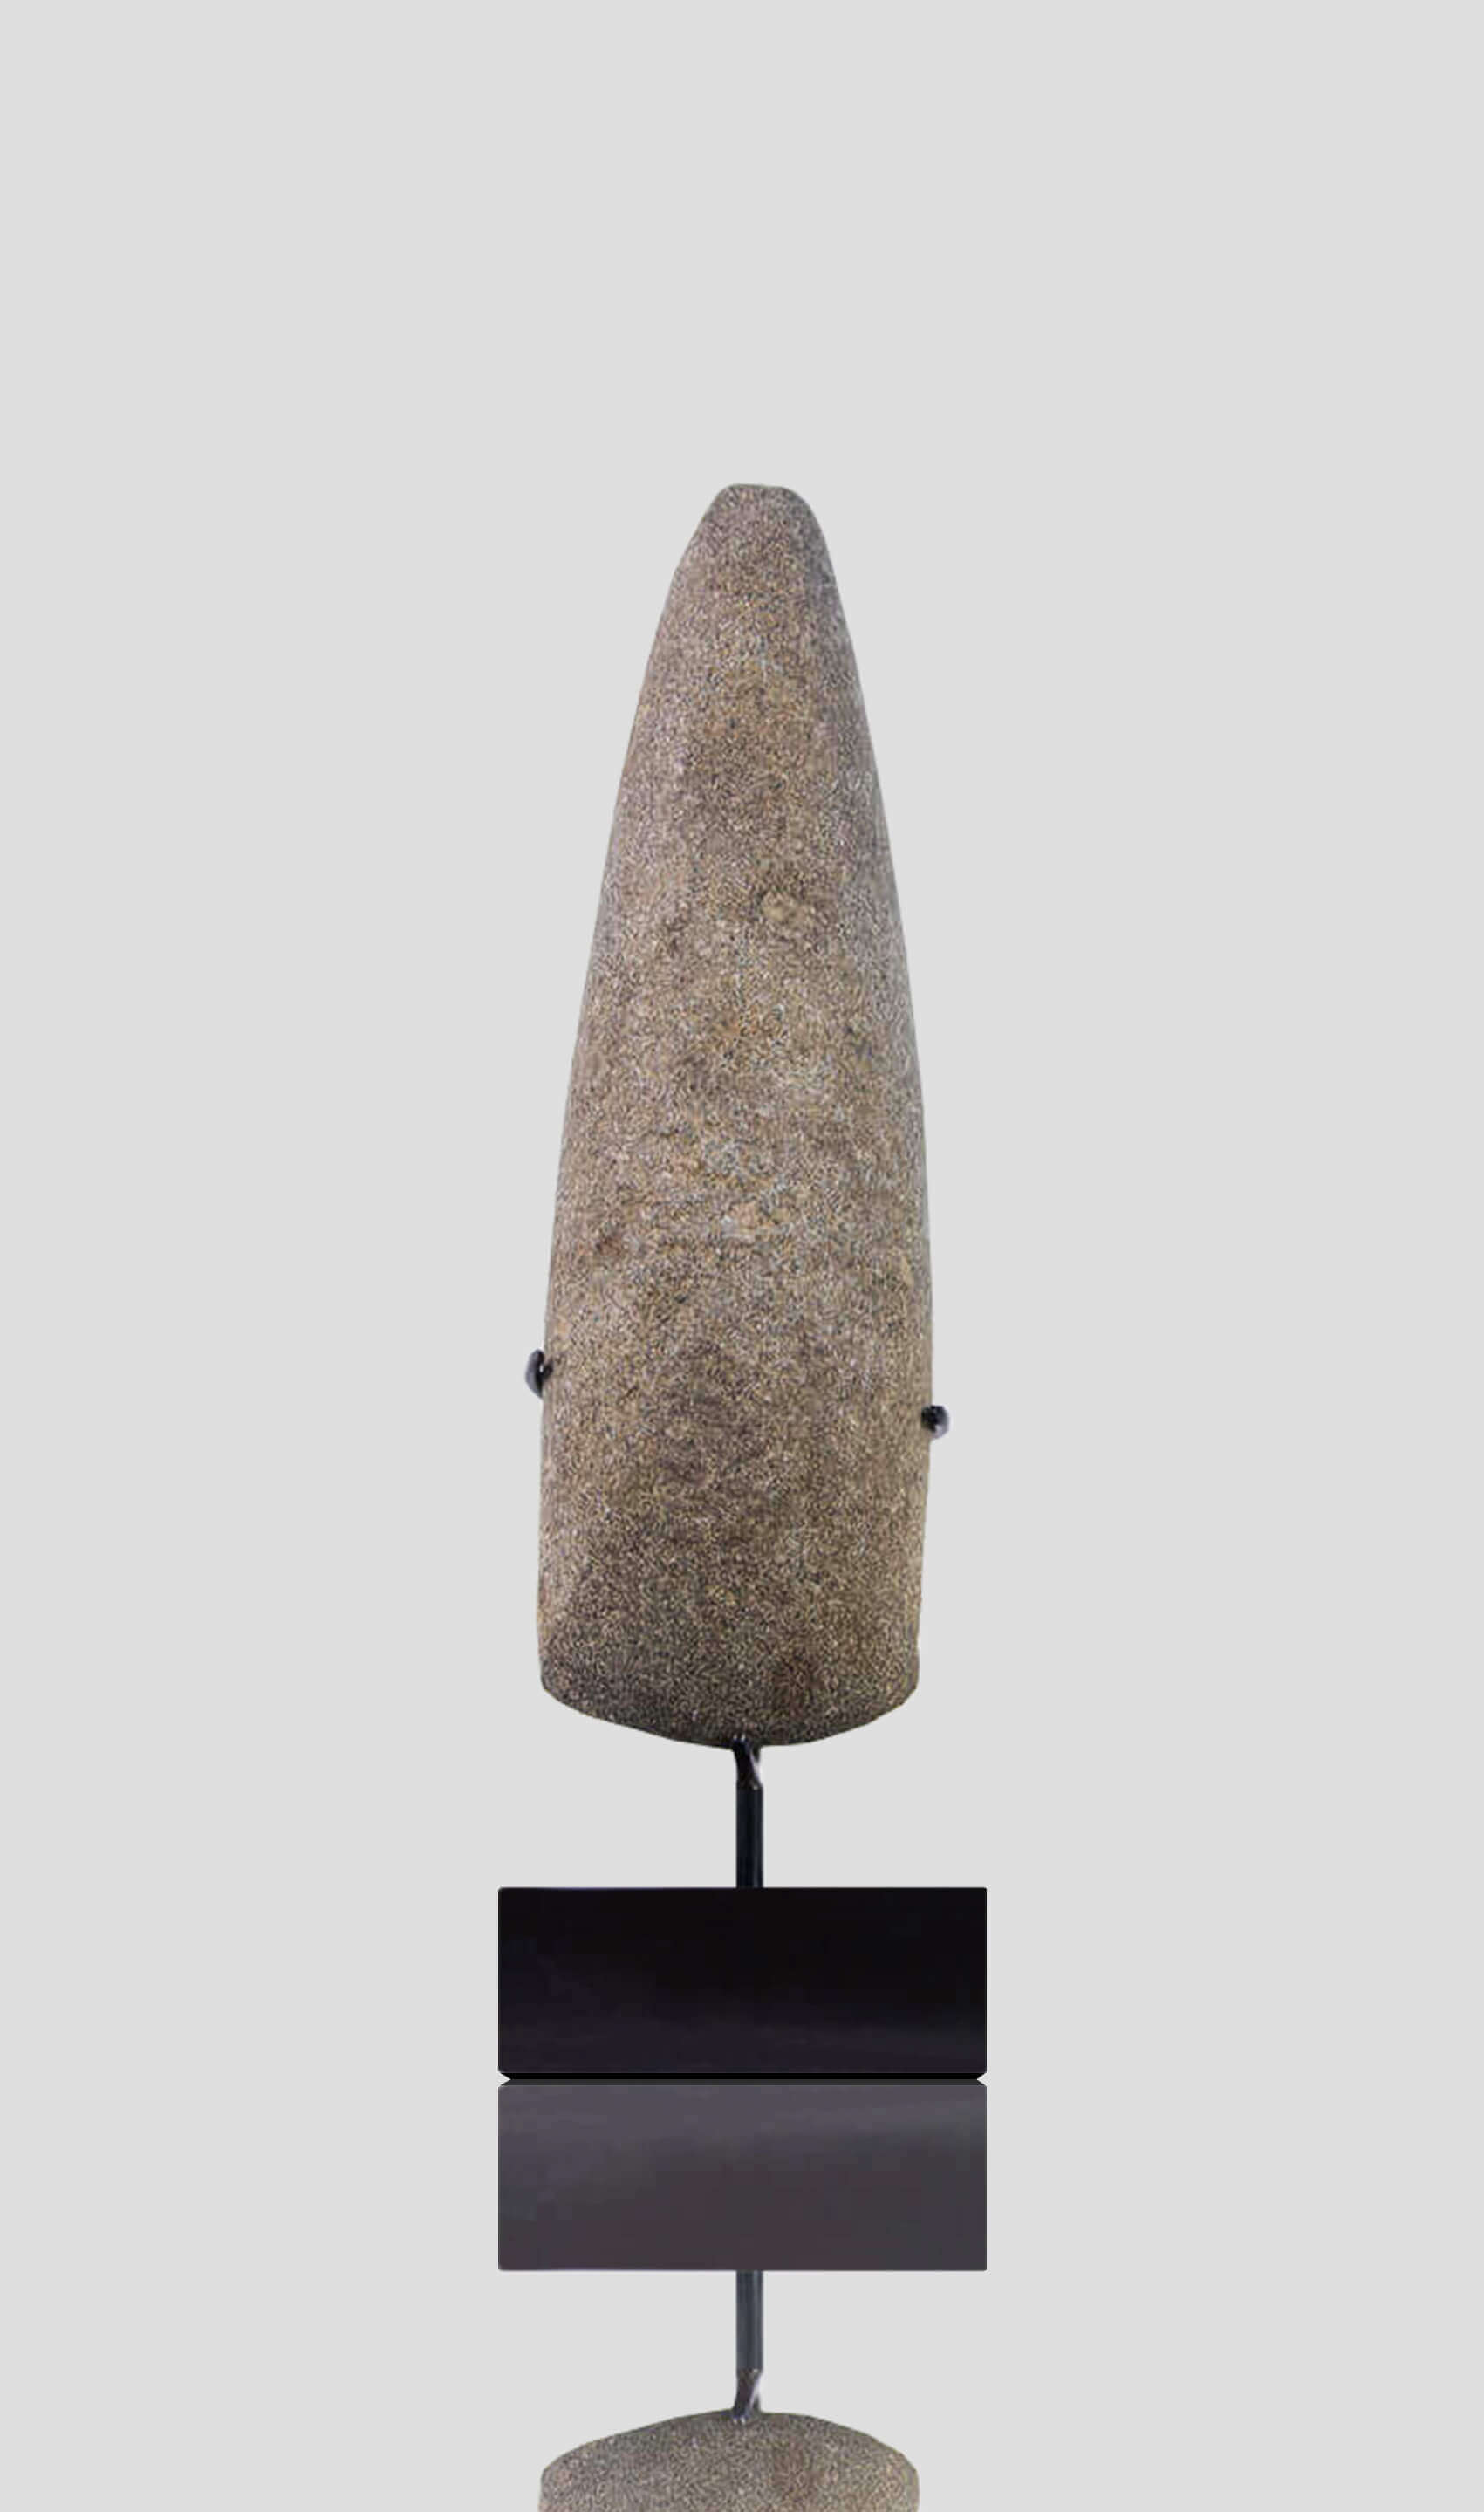 Artefact Neolithic Capsian Hand Axe [8,500 BC] 261mm